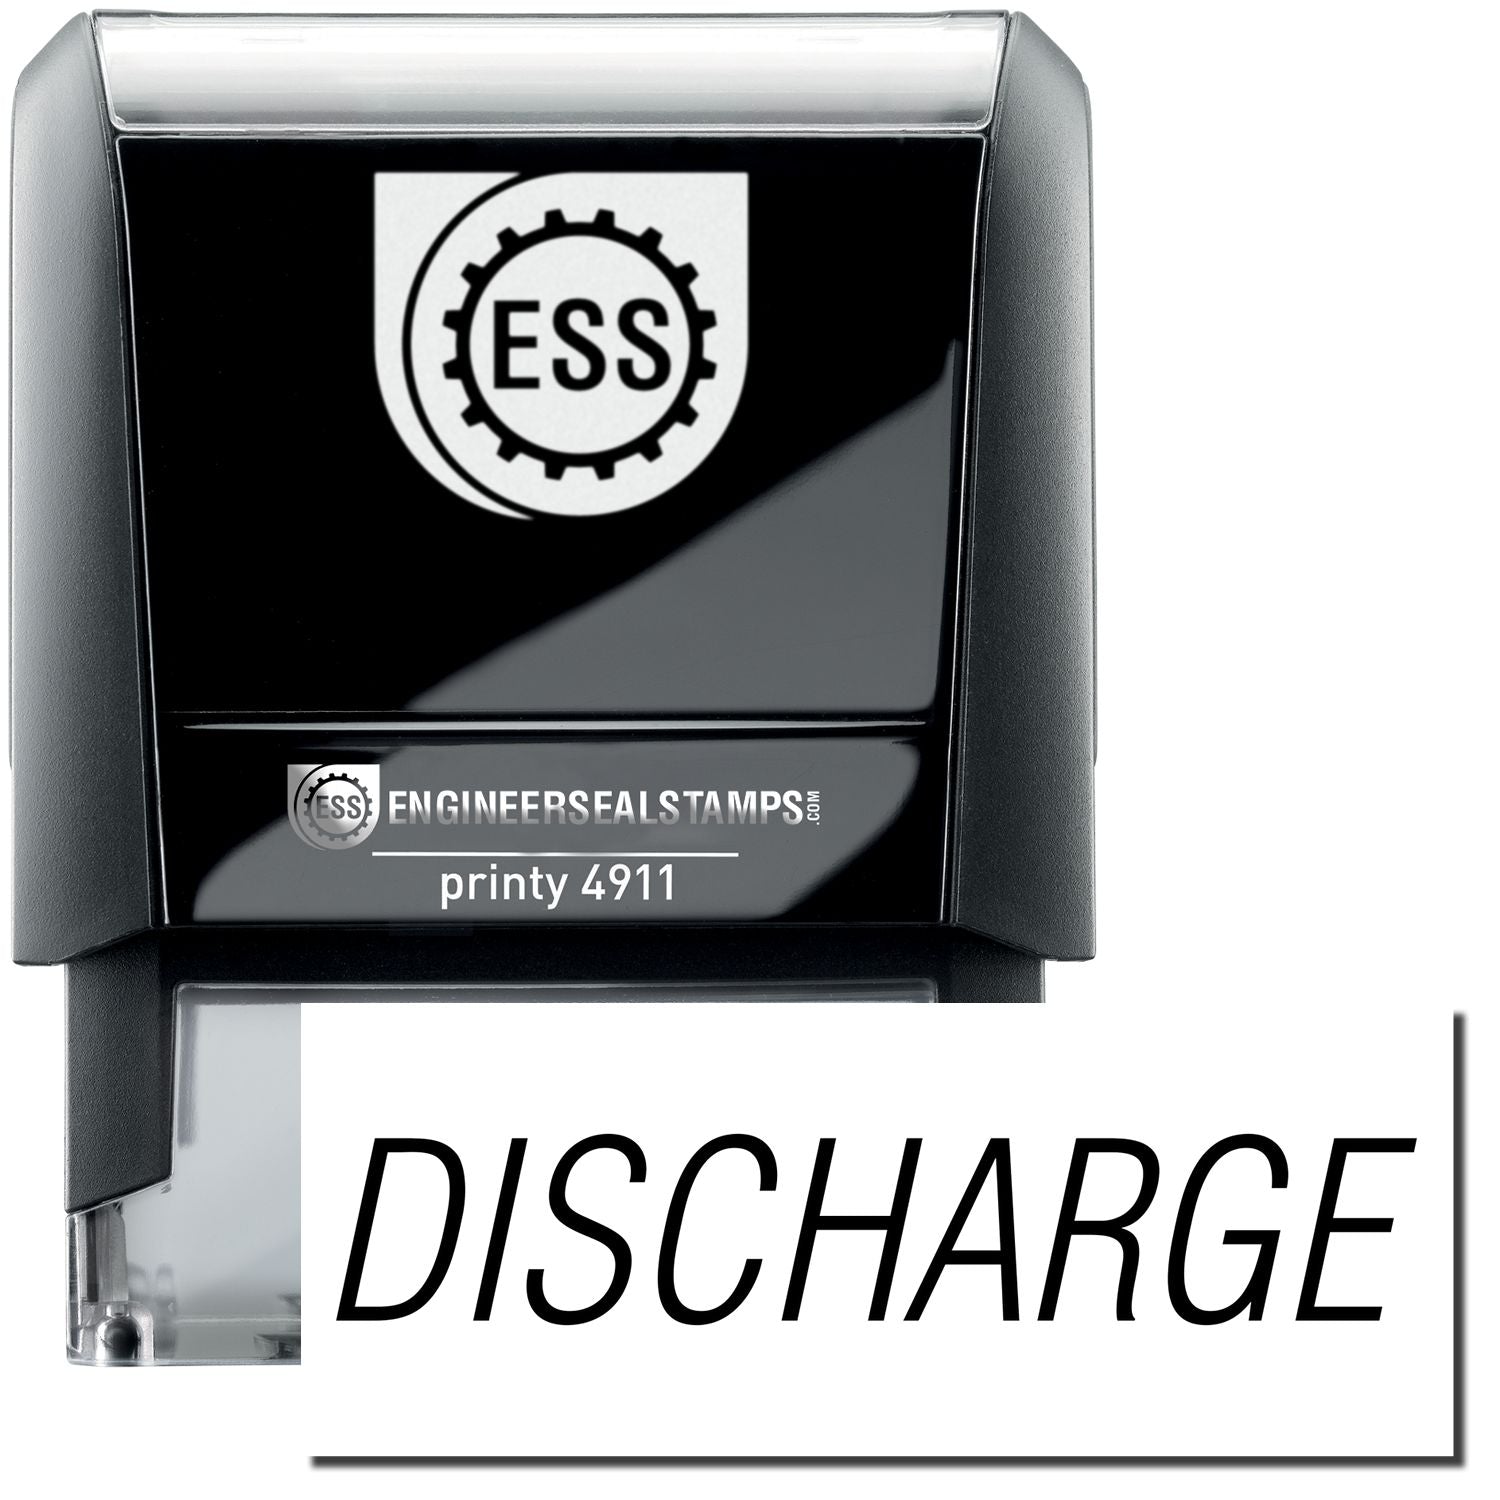 A self-inking stamp with a stamped image showing how the text "DISCHARGE" is displayed after stamping.